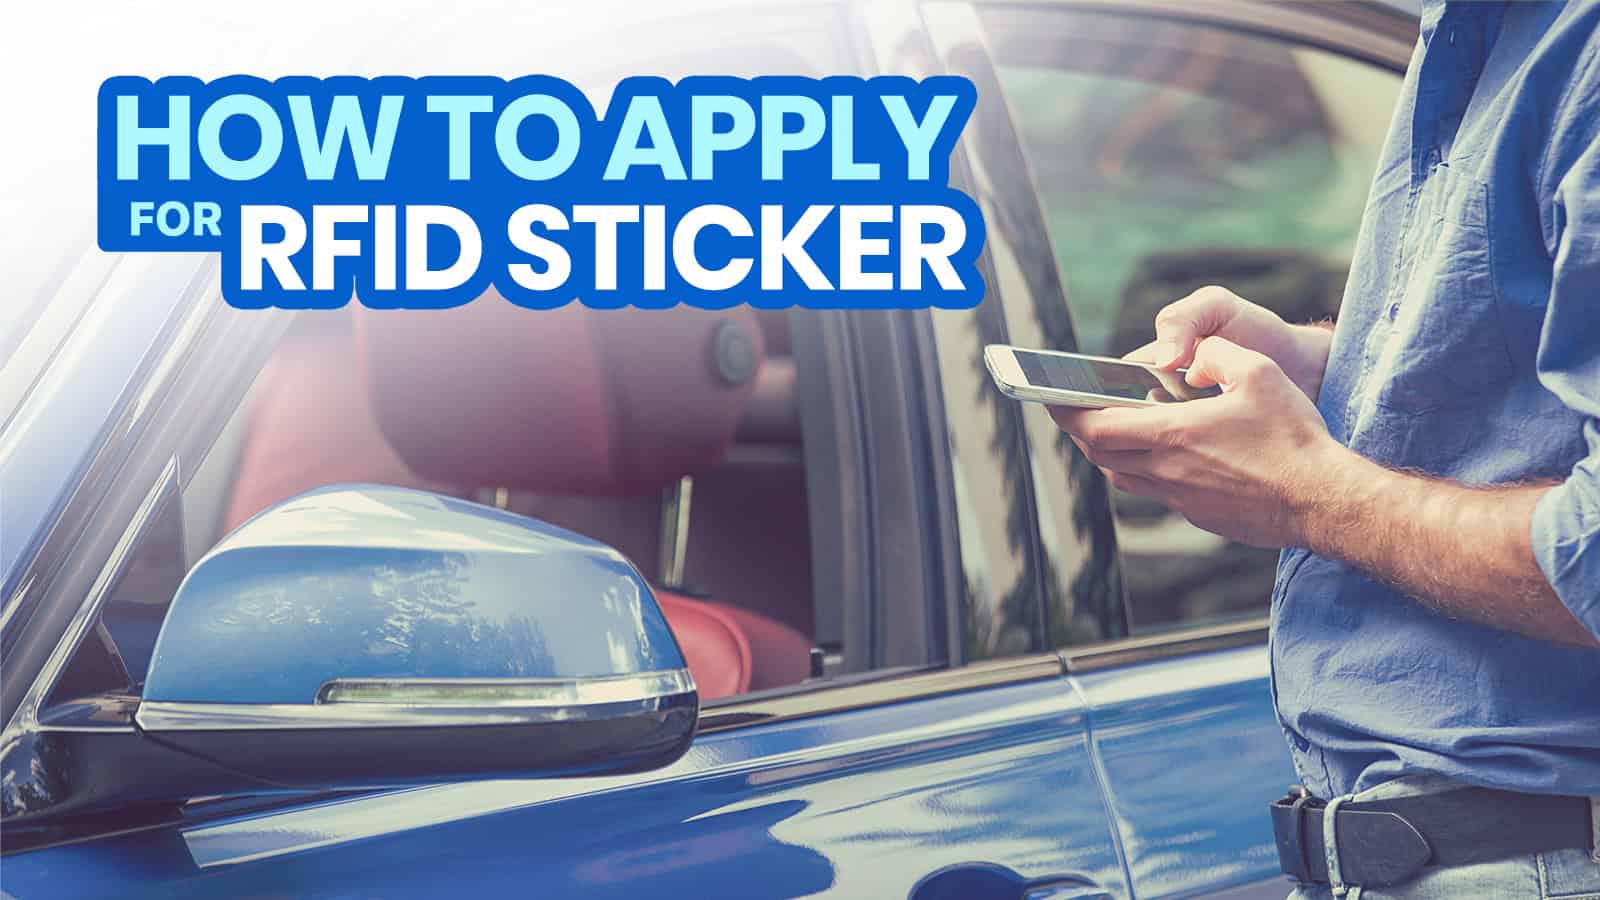 How to Apply for RFID STICKER for SLEX, NLEX, CAVITEX, etc. (EasyTrip & Autosweep)